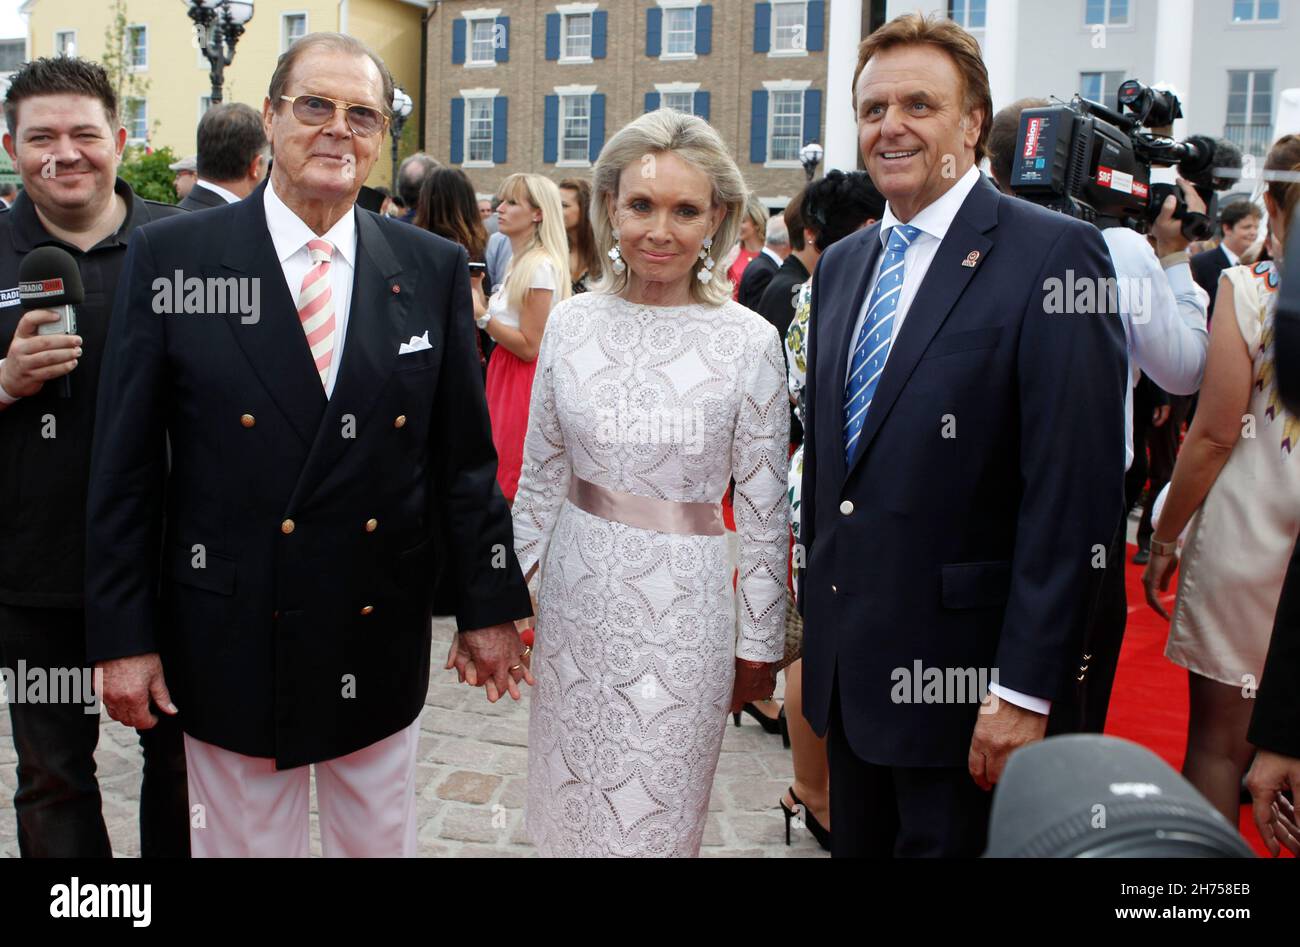 Rust, Germany - July 12, 2012: Hotel Bell Rock Opening at Europa-Park in Rust with British Actor Sir Roger Moore, wife Kristina Tholstrup and Europa-Park CEO Roland Mack. Europa, Park. Mandoga Media Stock Photo